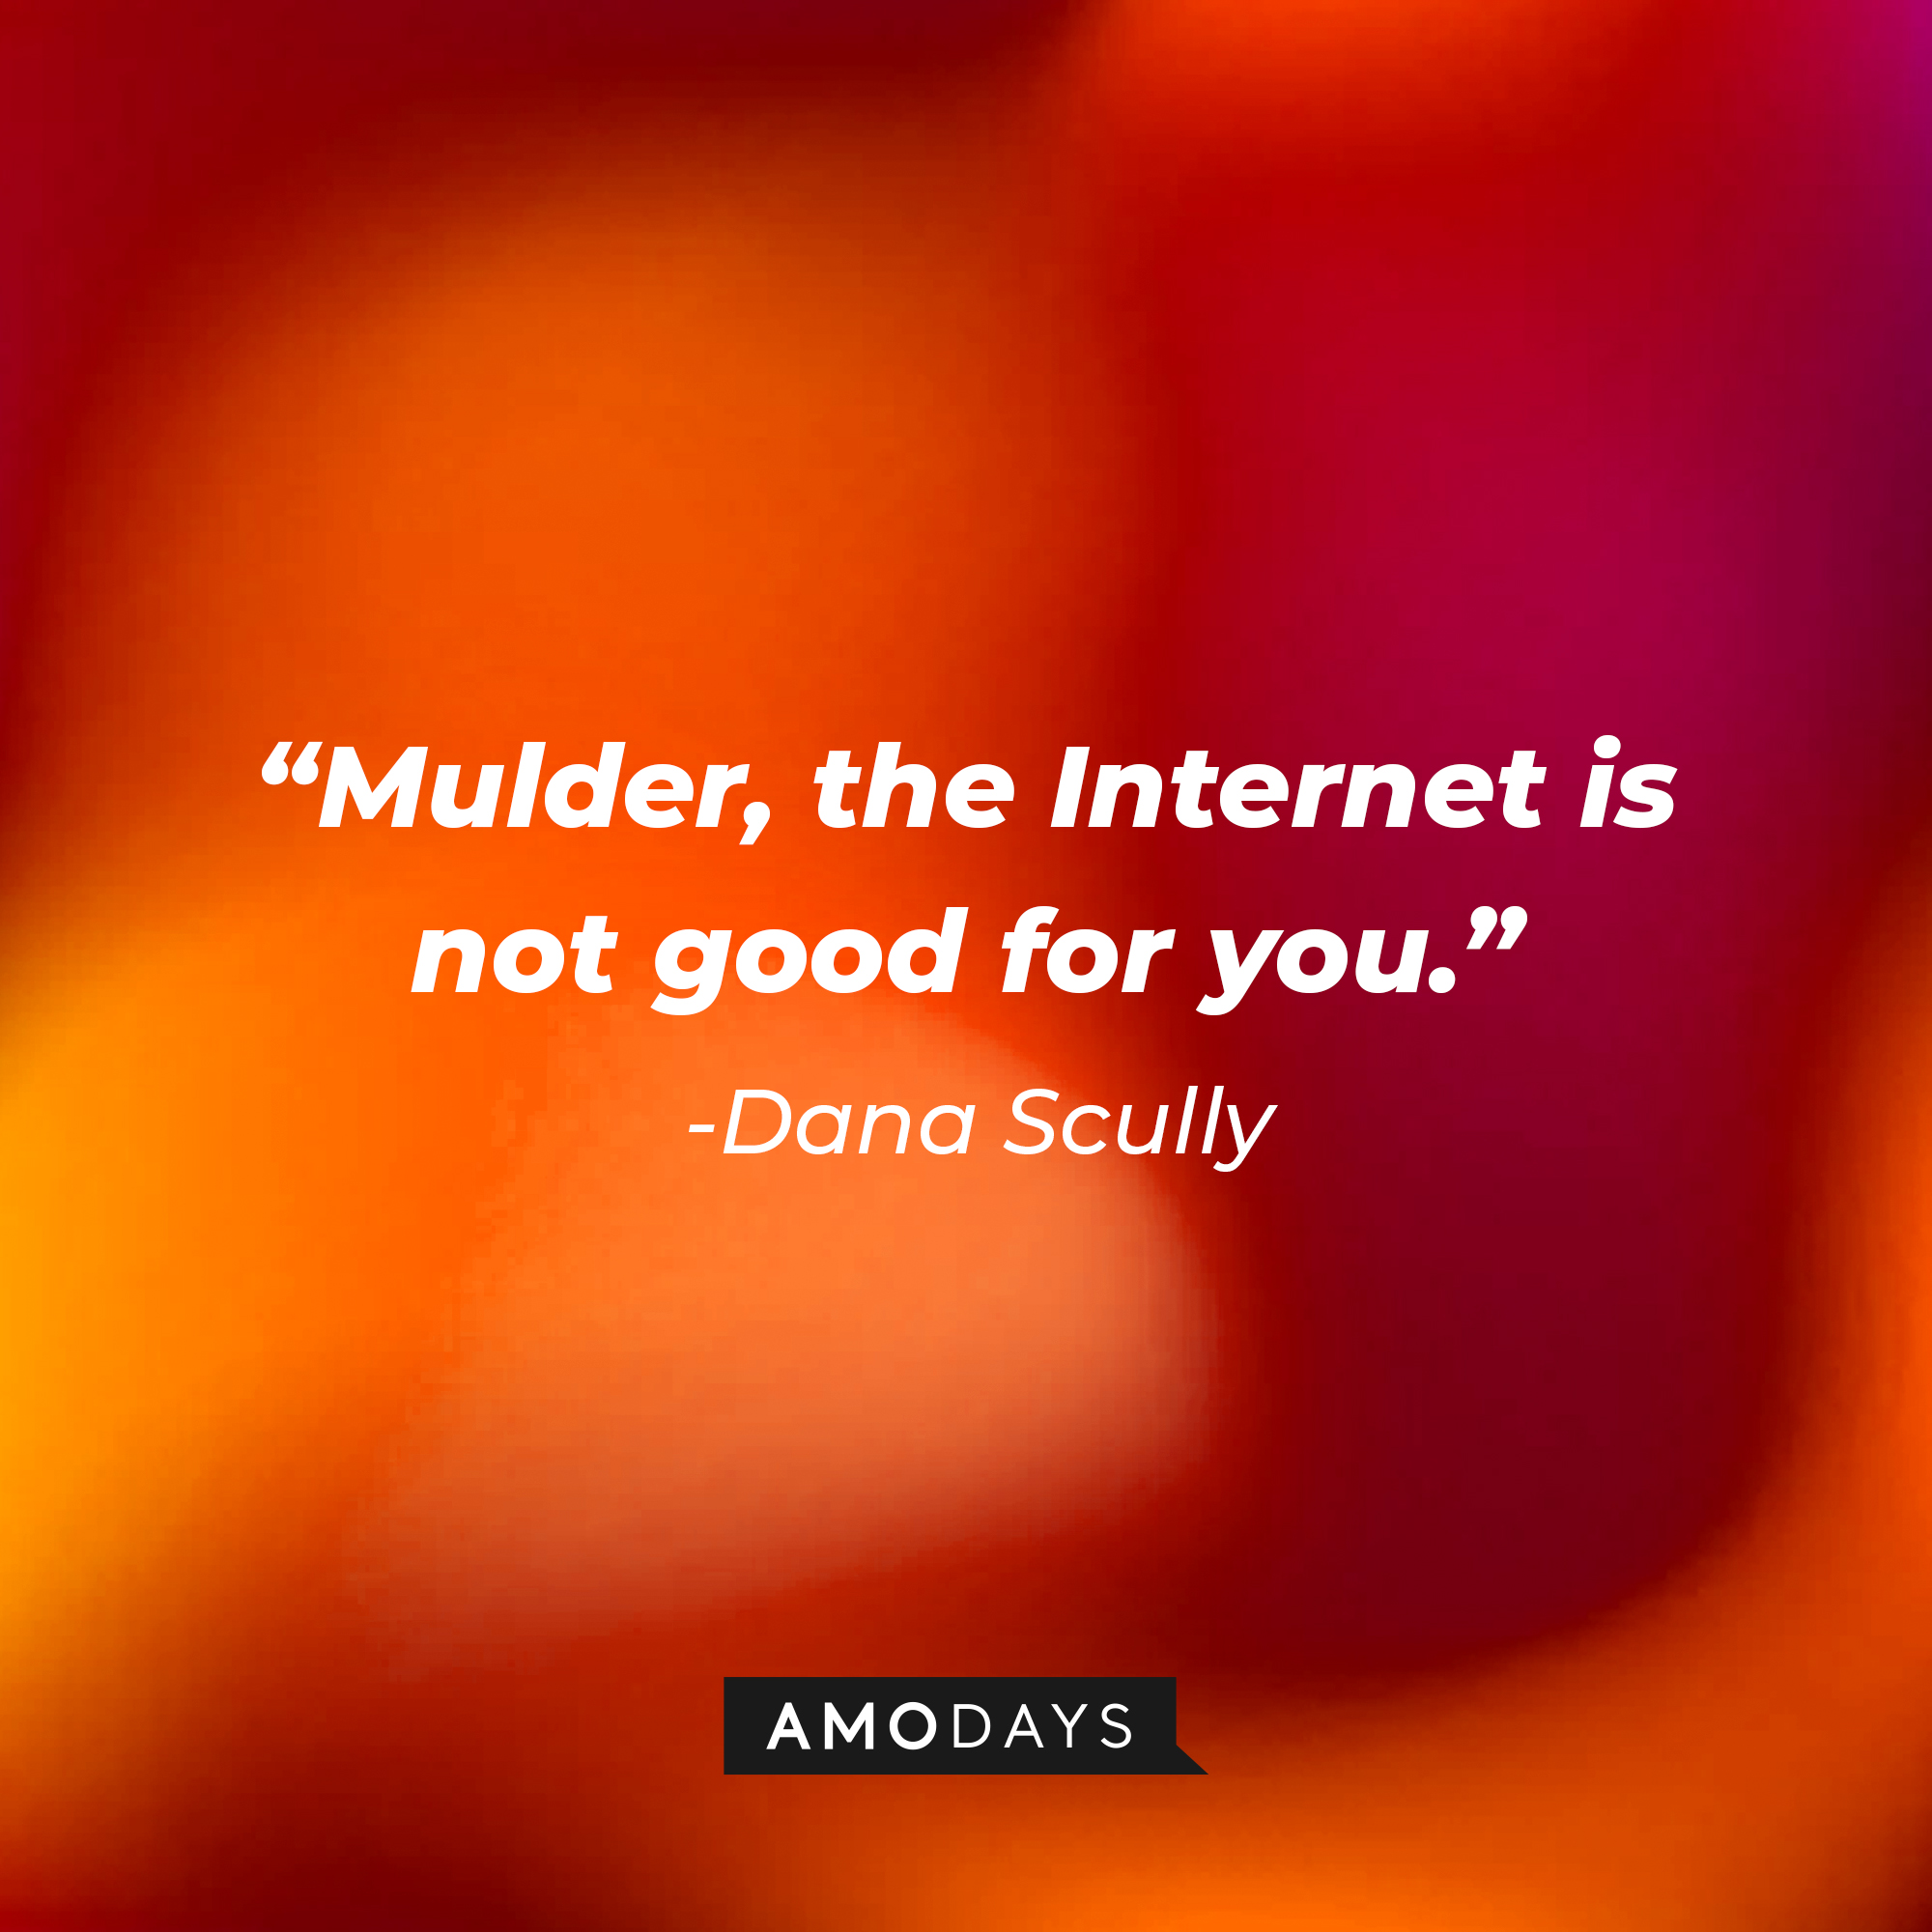 Dana Scully's quote: "Mulder, the Internet is not good for you." | Source: AmoDays